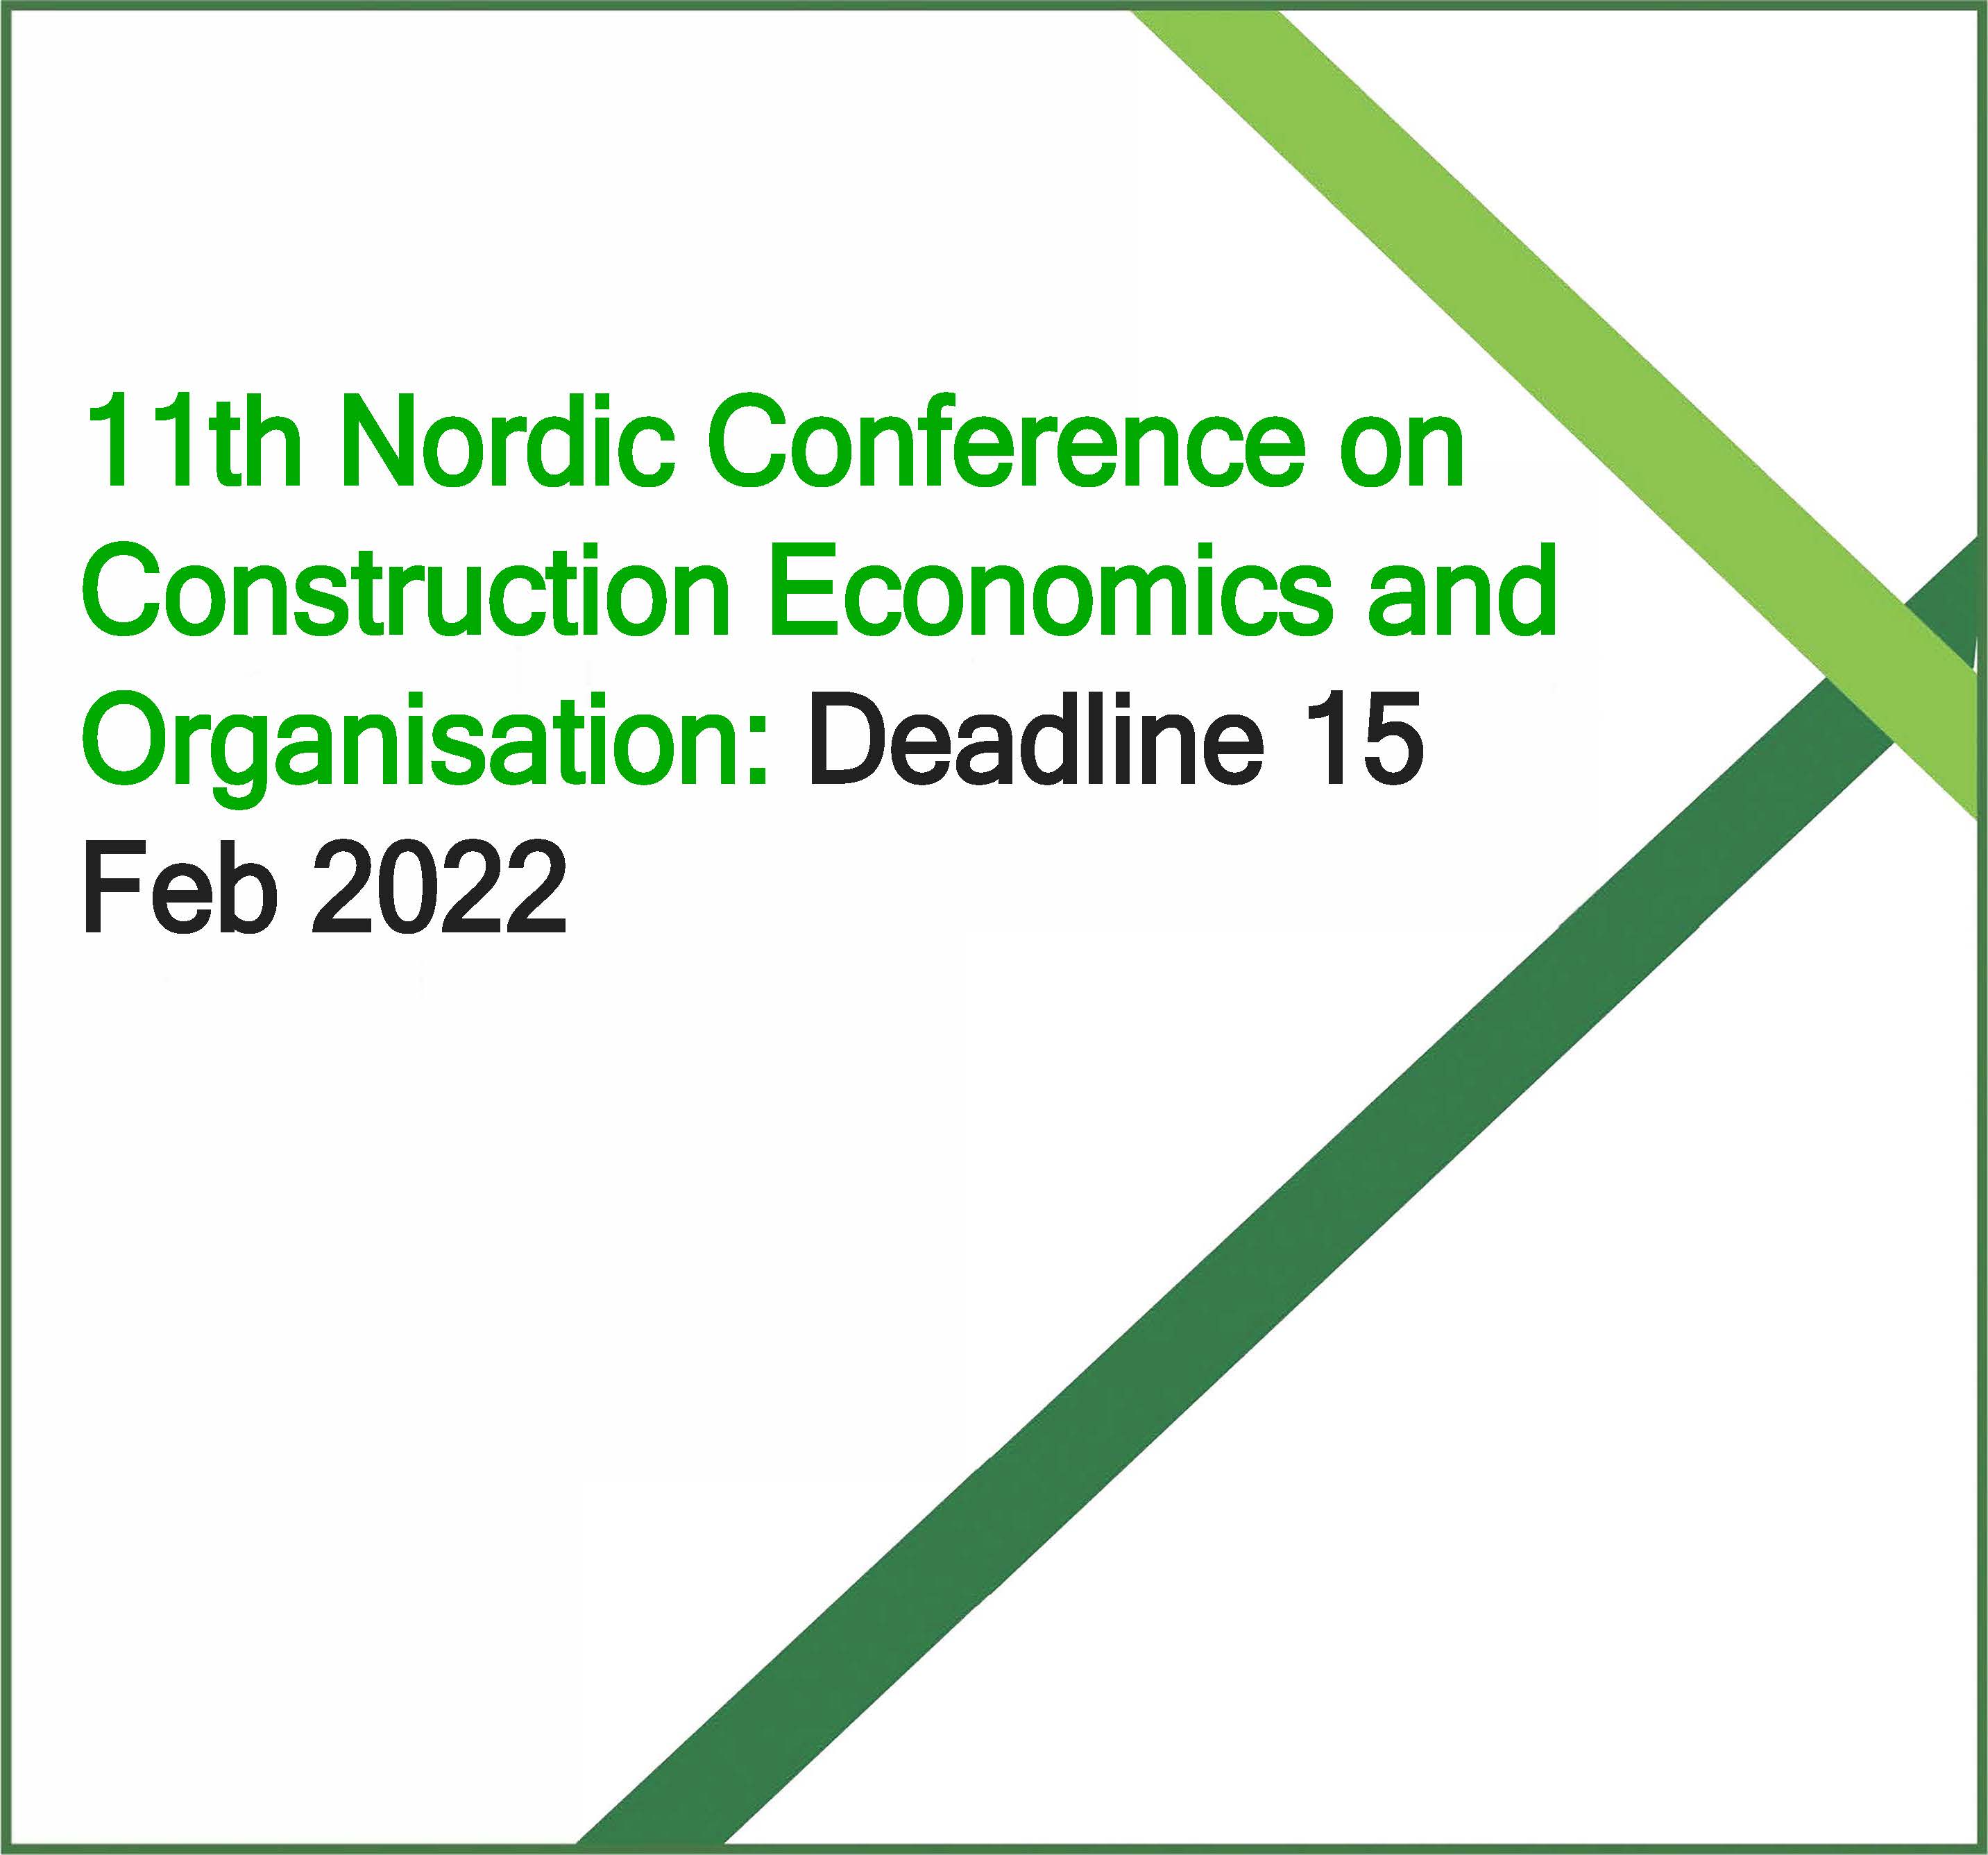 The 11th Nordic Conference on Construction Economics and Organisation: Extension 15 Feb 2022